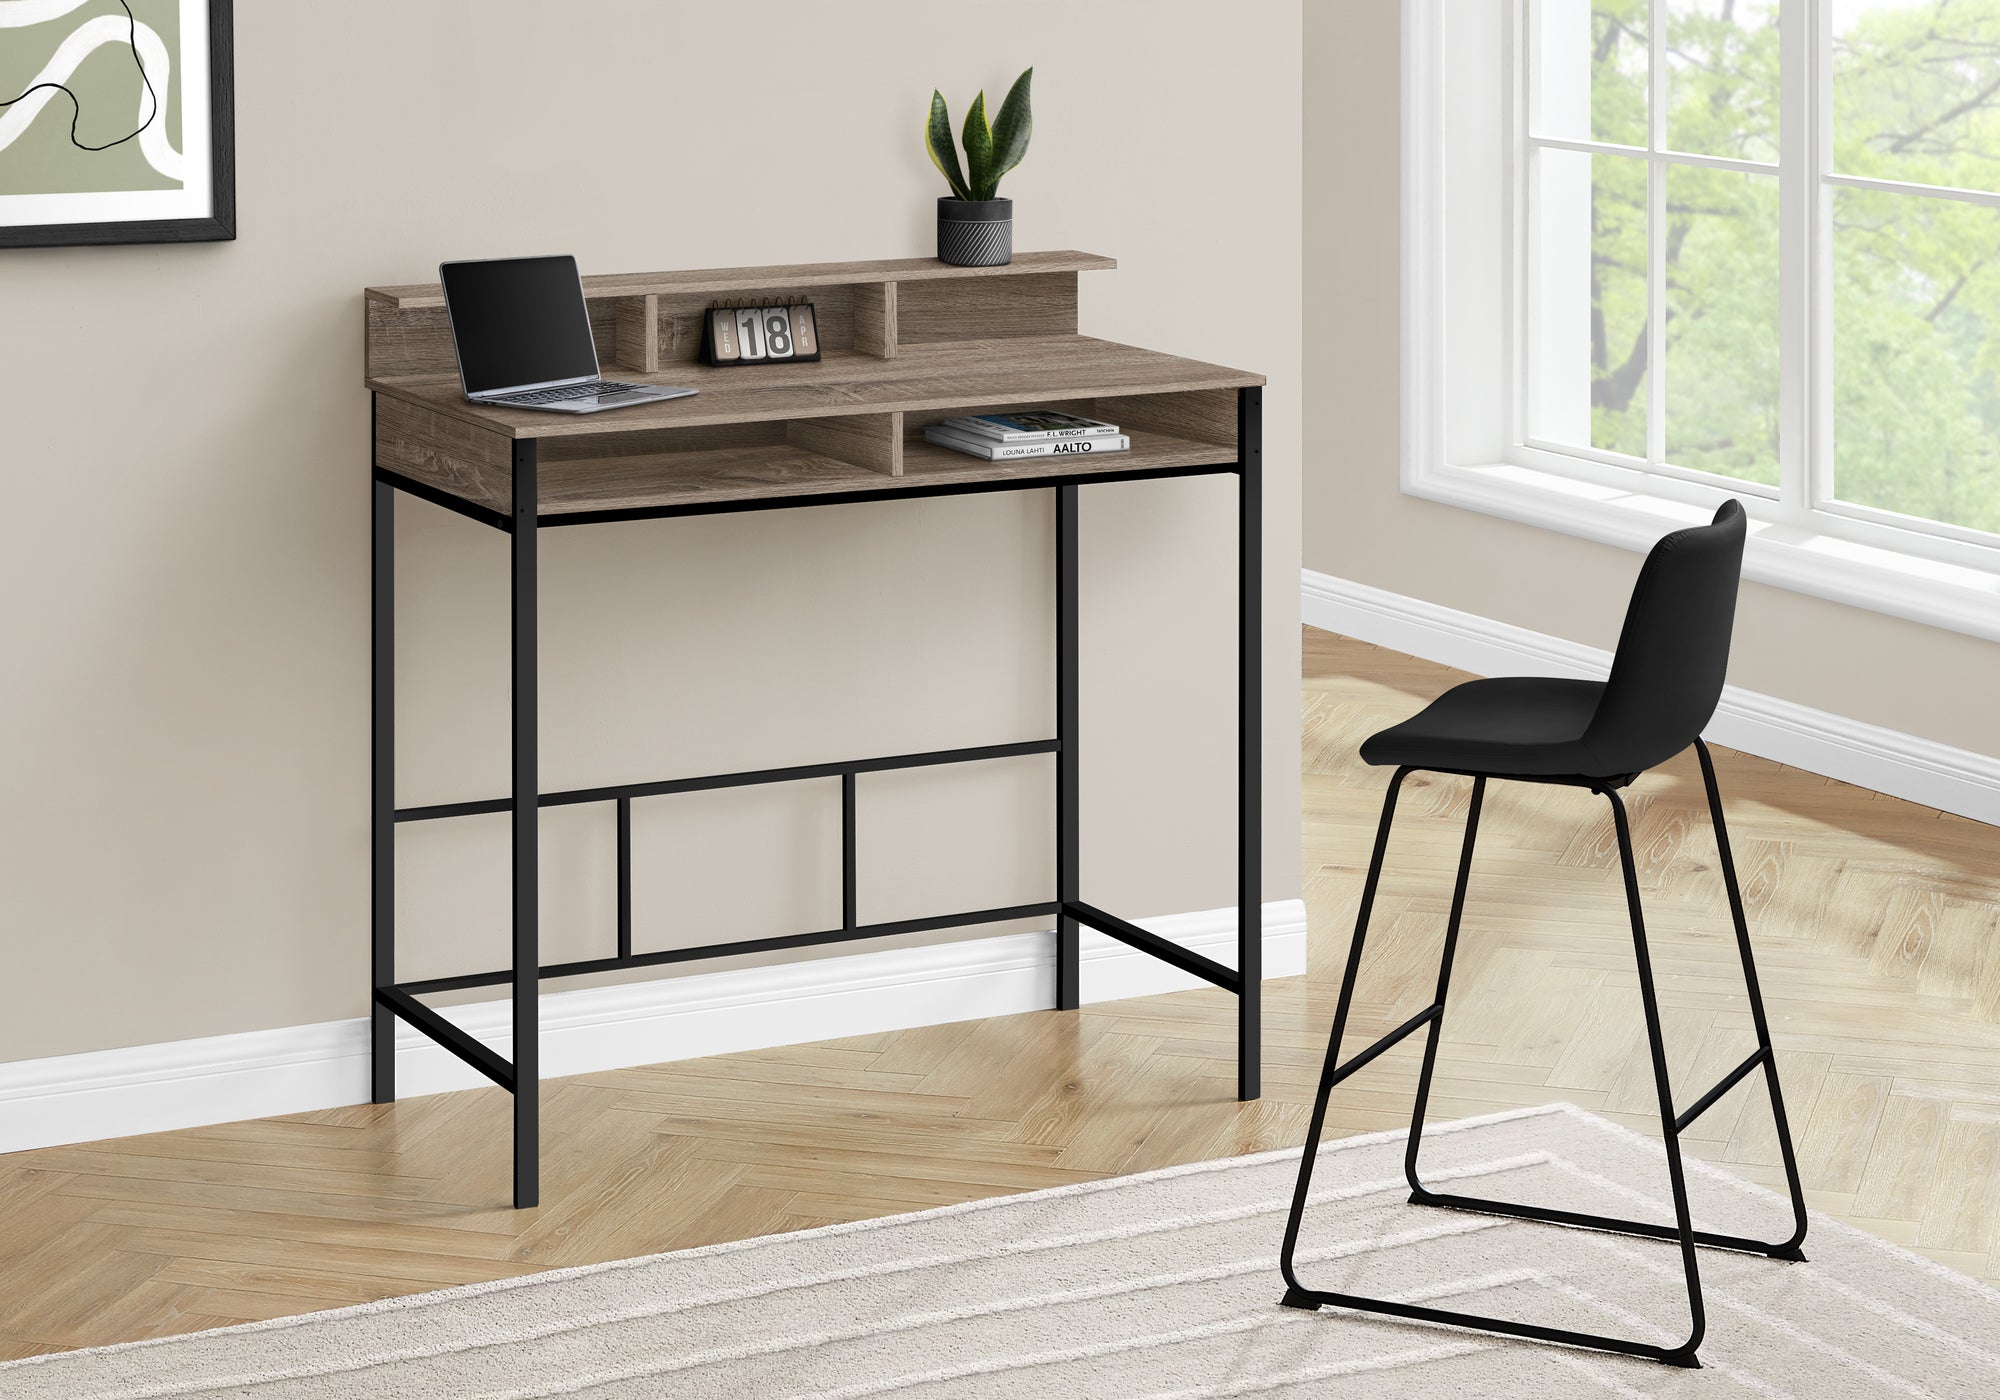 MN-857702    Computer Desk, Home Office, Standing, Storage Shelves, 48"L, Metal Legs, Laminate, Dark Taupe, Contemporary, Industrial, Modern